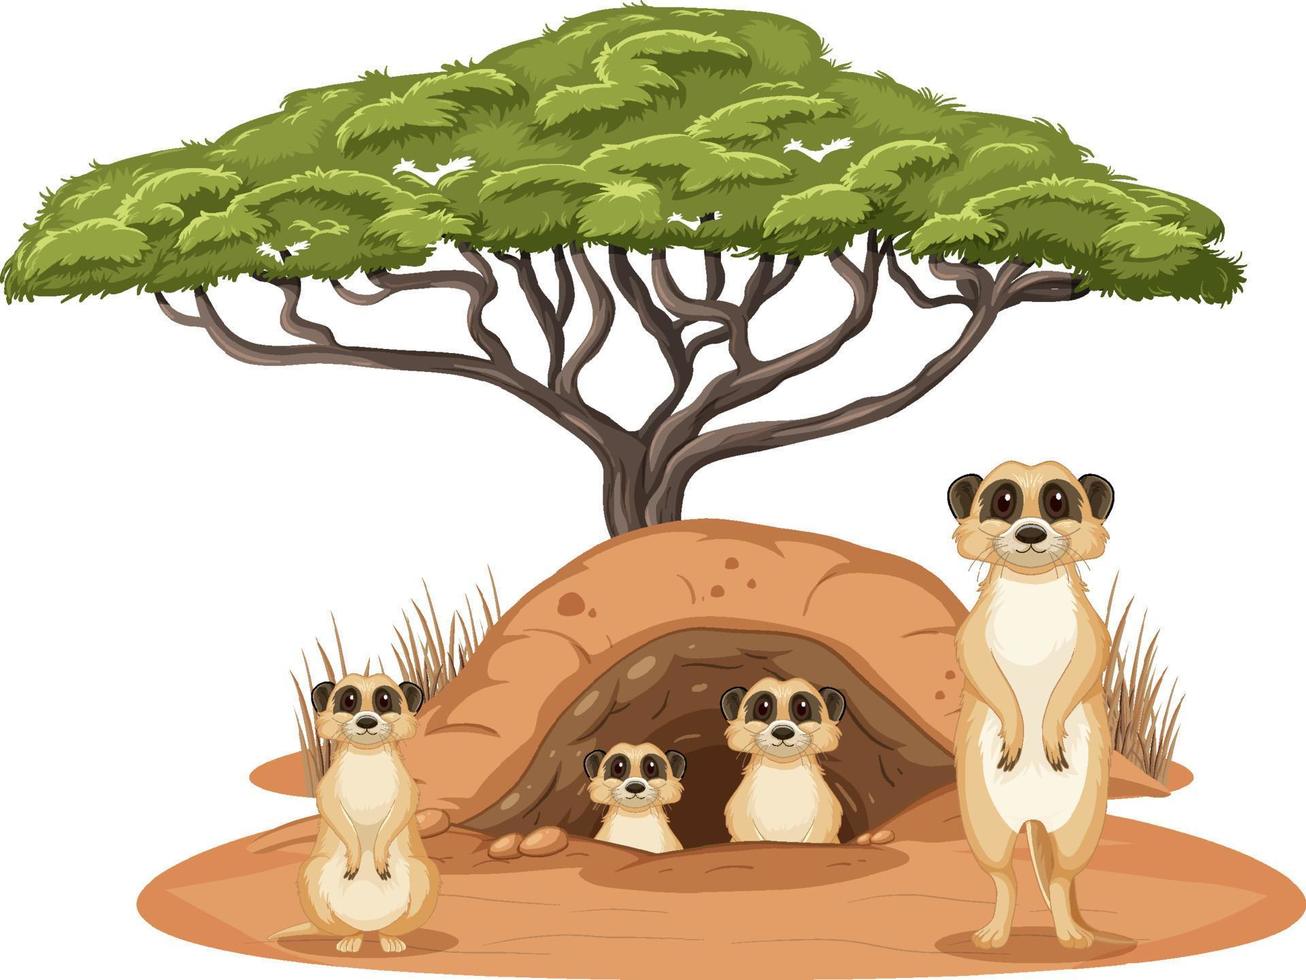 Group of meerkats with burrow on white background vector